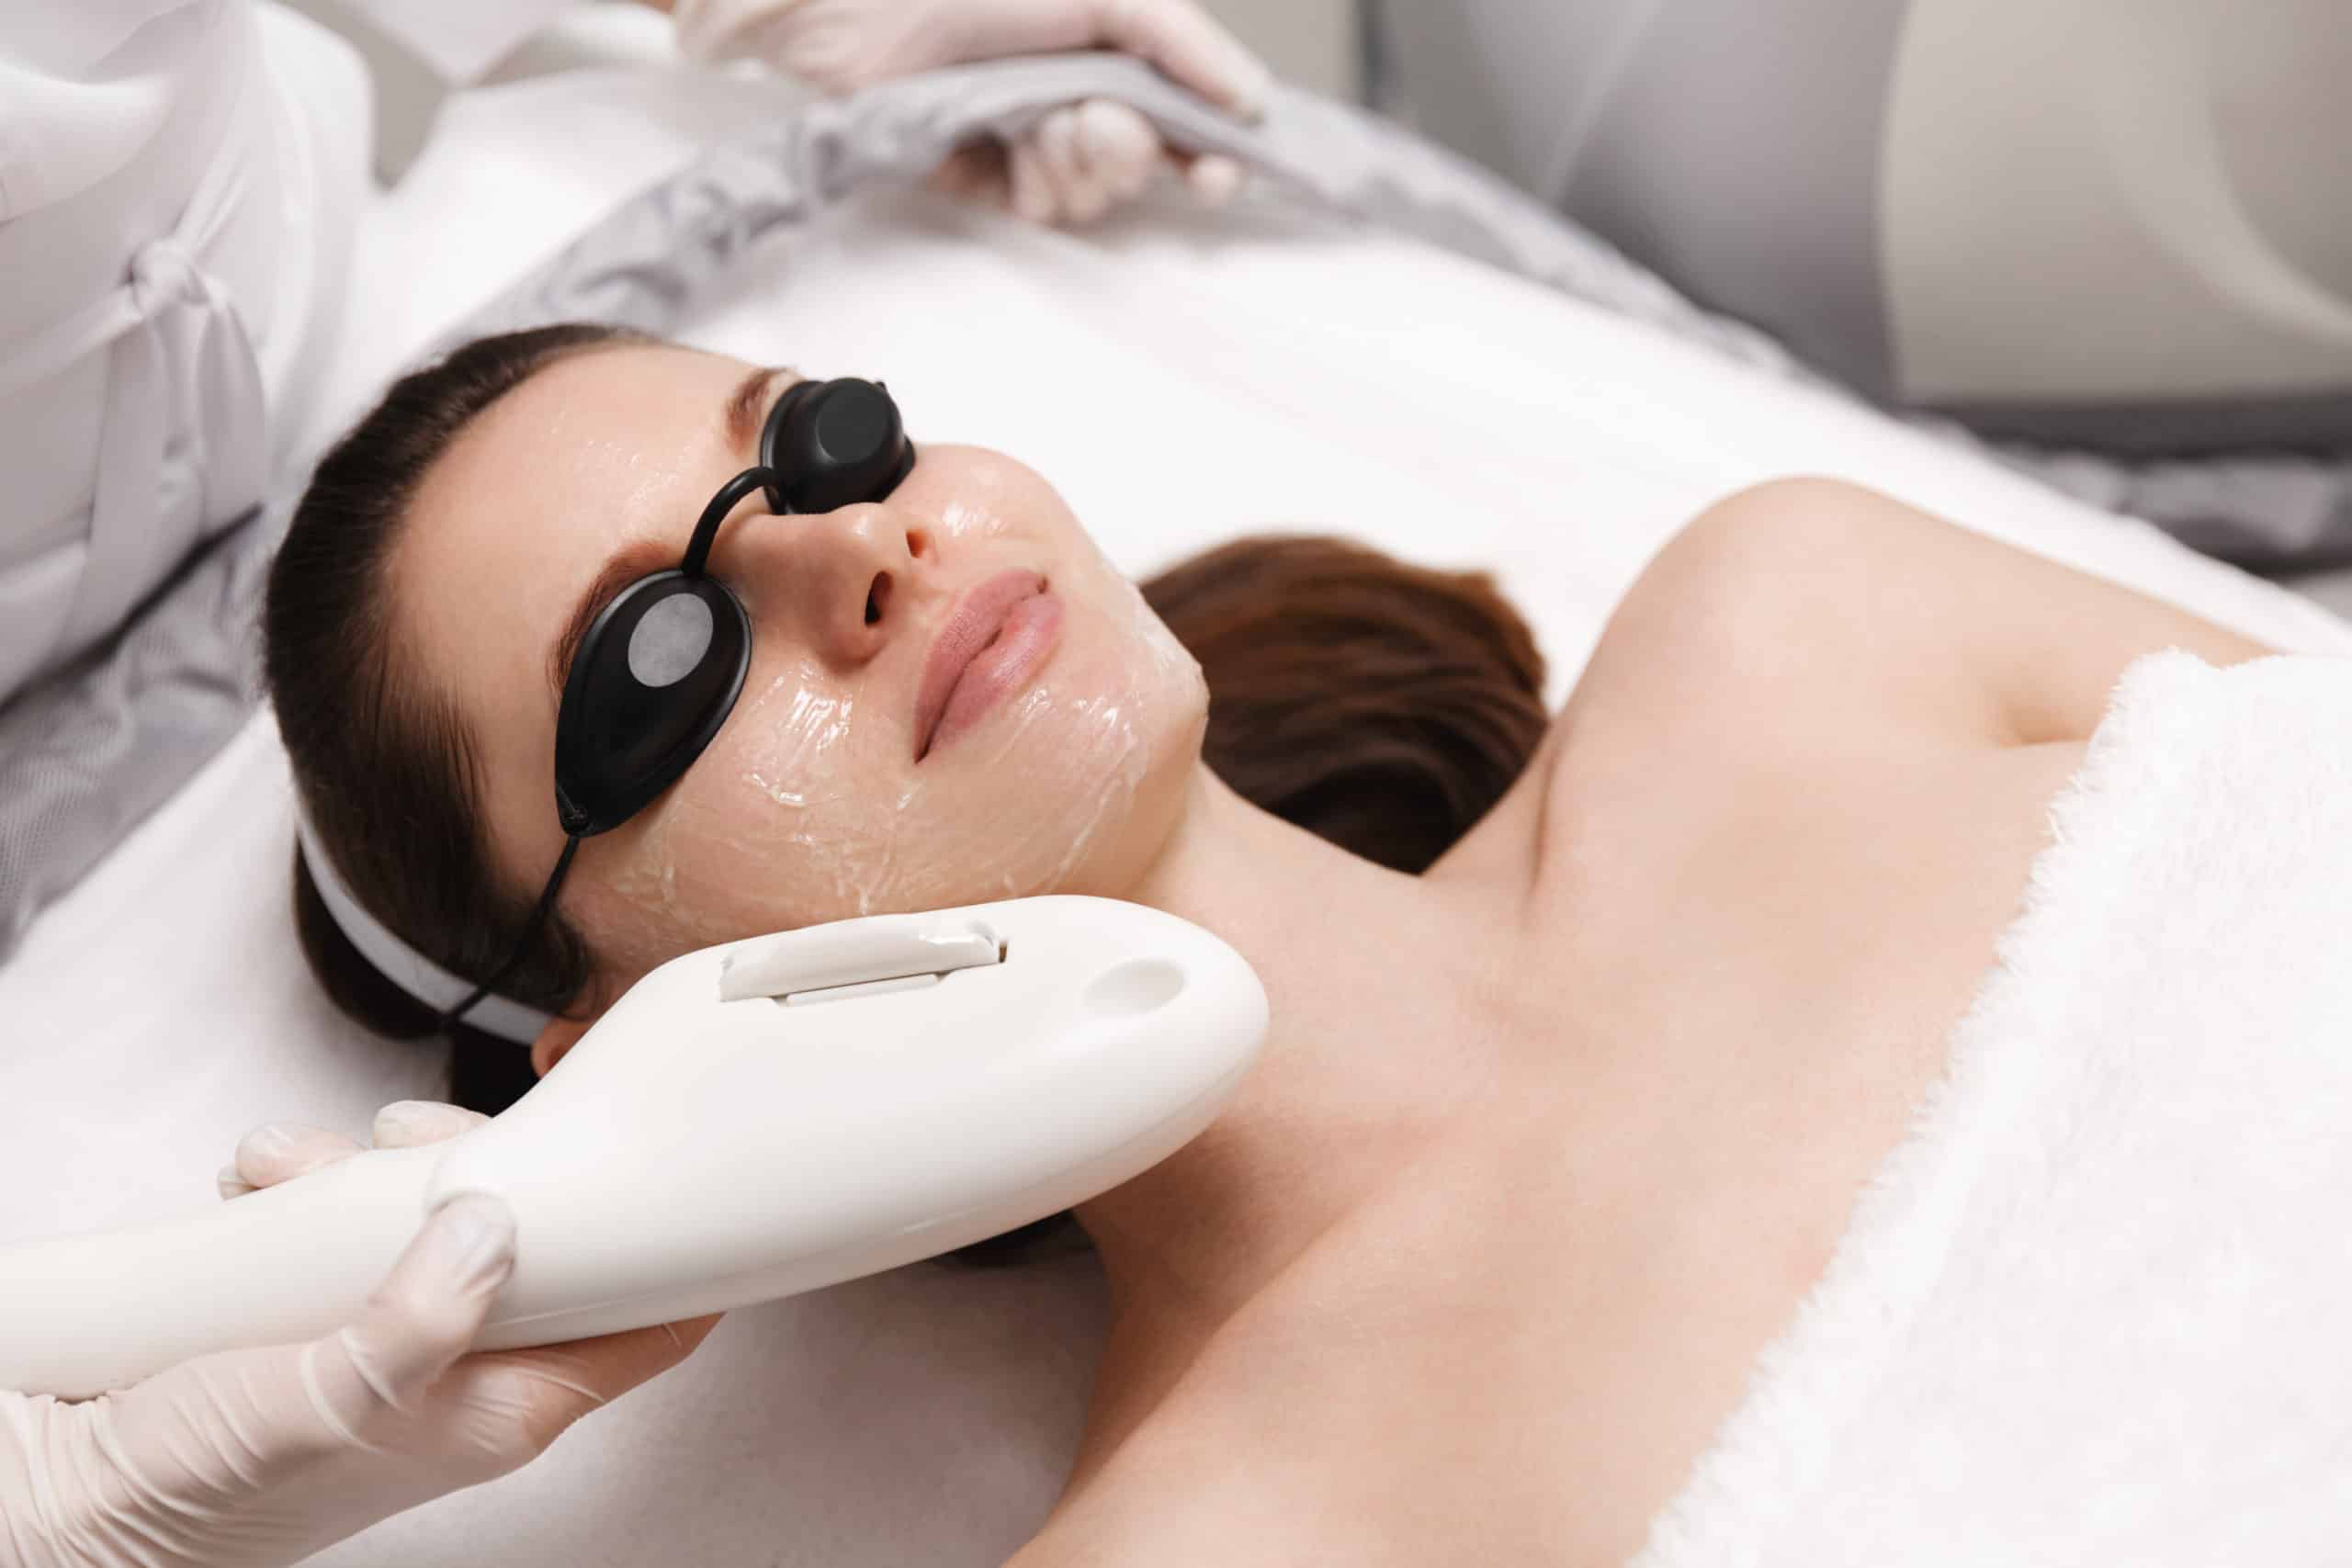 Is It Safe To Get A Photofacial Done To Get Rid Of Prolonged Tanning